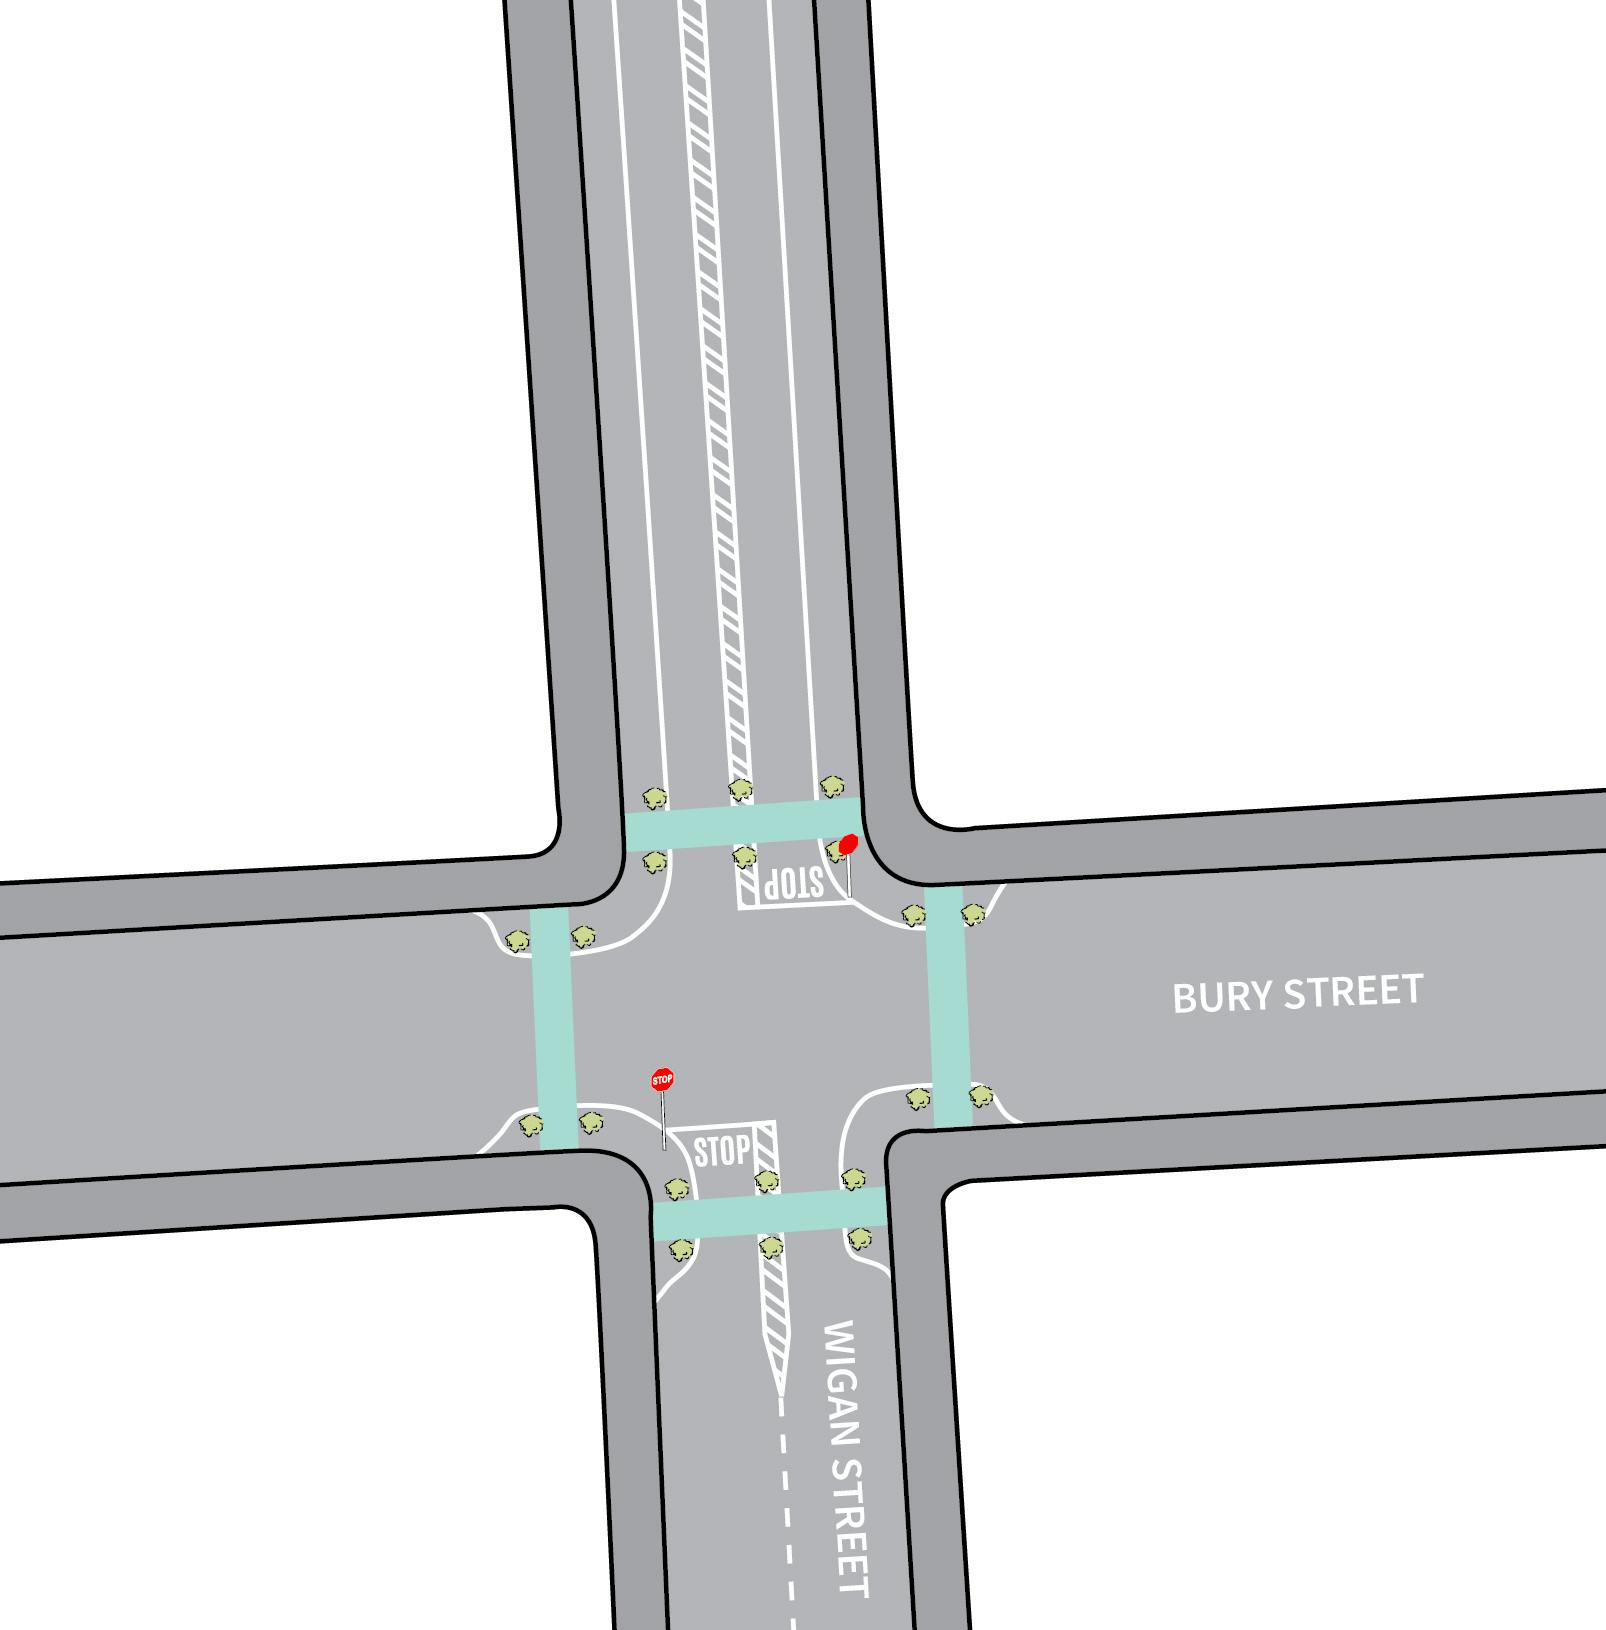 Intersection Priority Changes